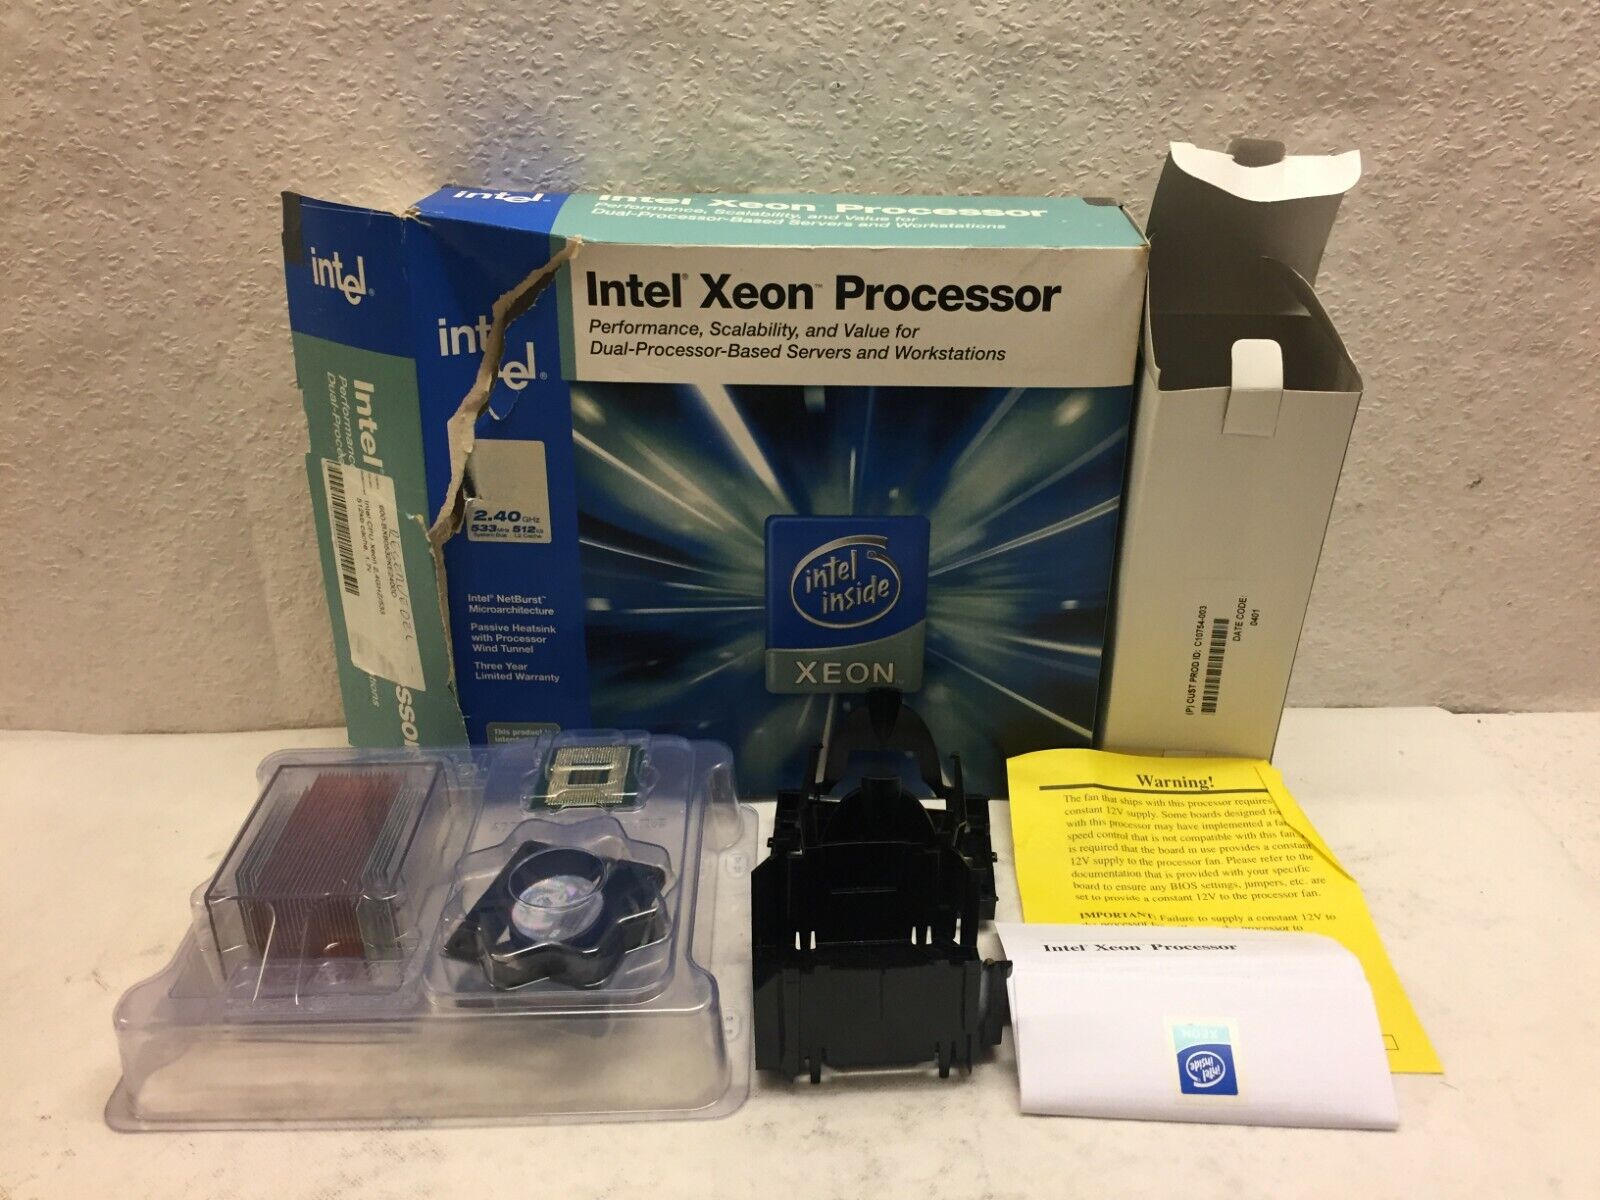 Intel Xeon Processor 2.40 Ghz 533 mhz 512 kb L2 Cache Complete NEVER USED